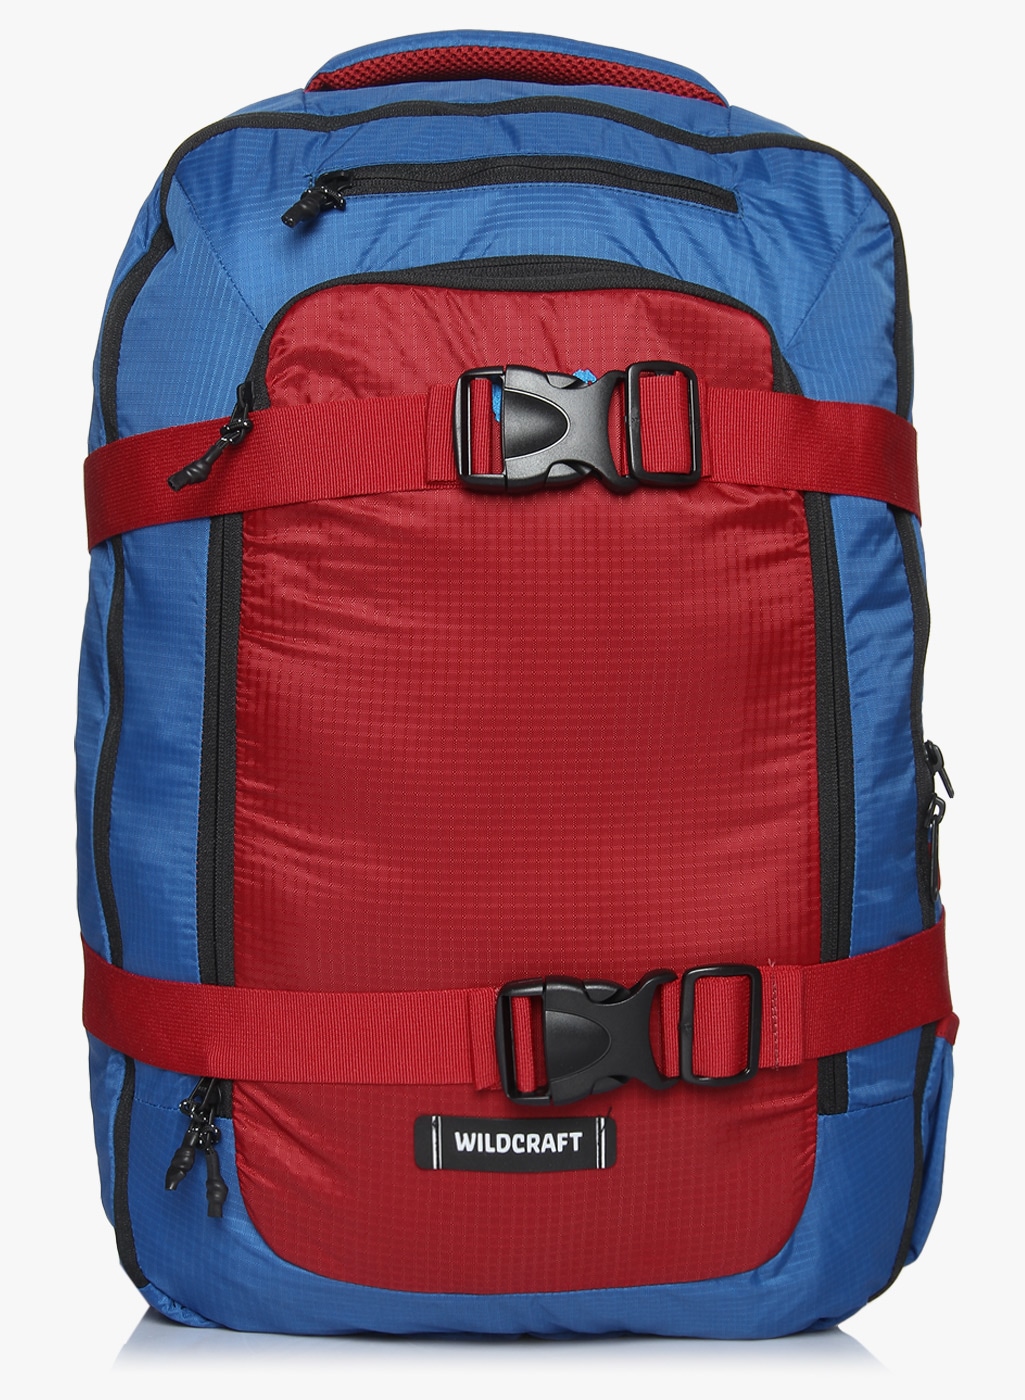 Globe Trotter 35 Blue Backpack Price in India